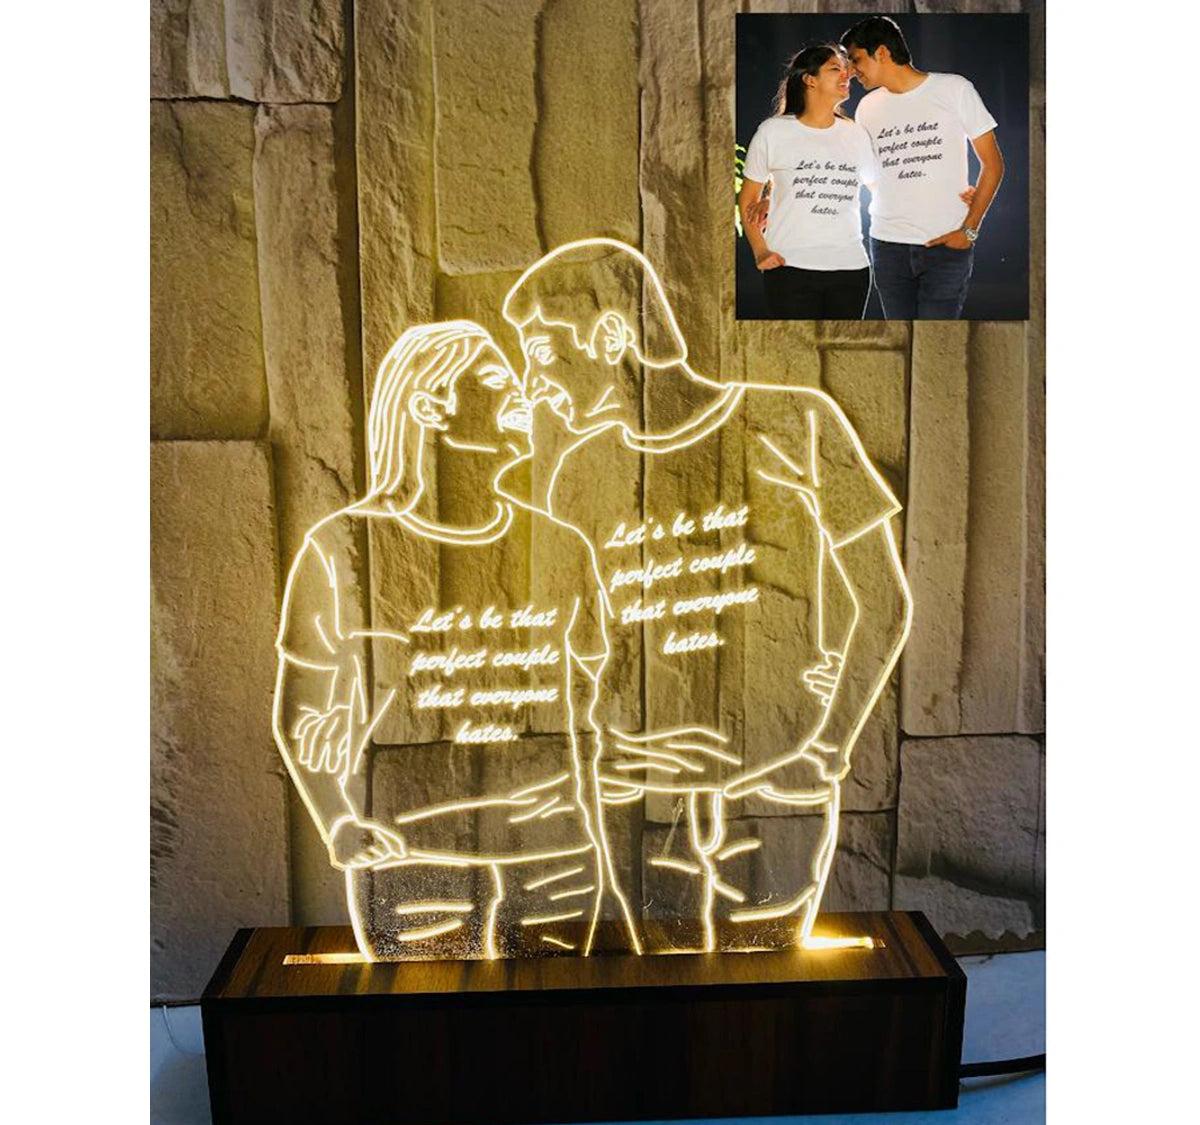 Buy or send Luminous Love Personalised Frame online with Bakers Wagon